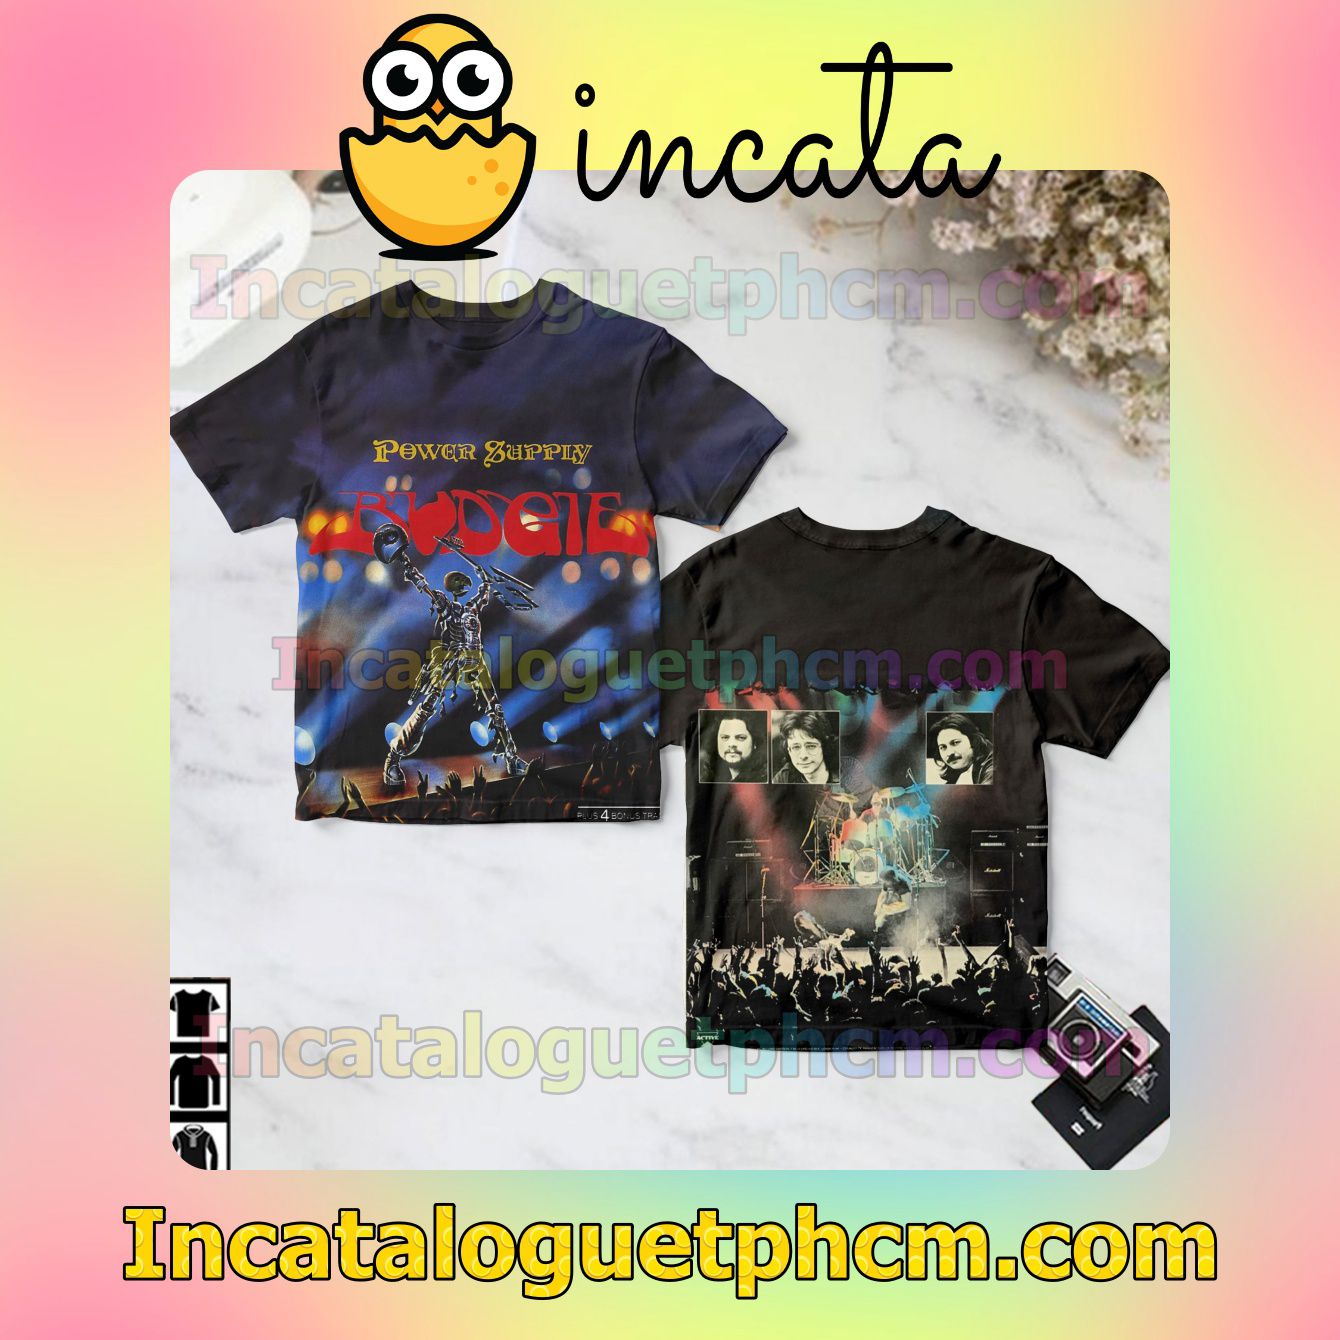 Budgie Power Supply Album Cover Style 2 Gift Shirt